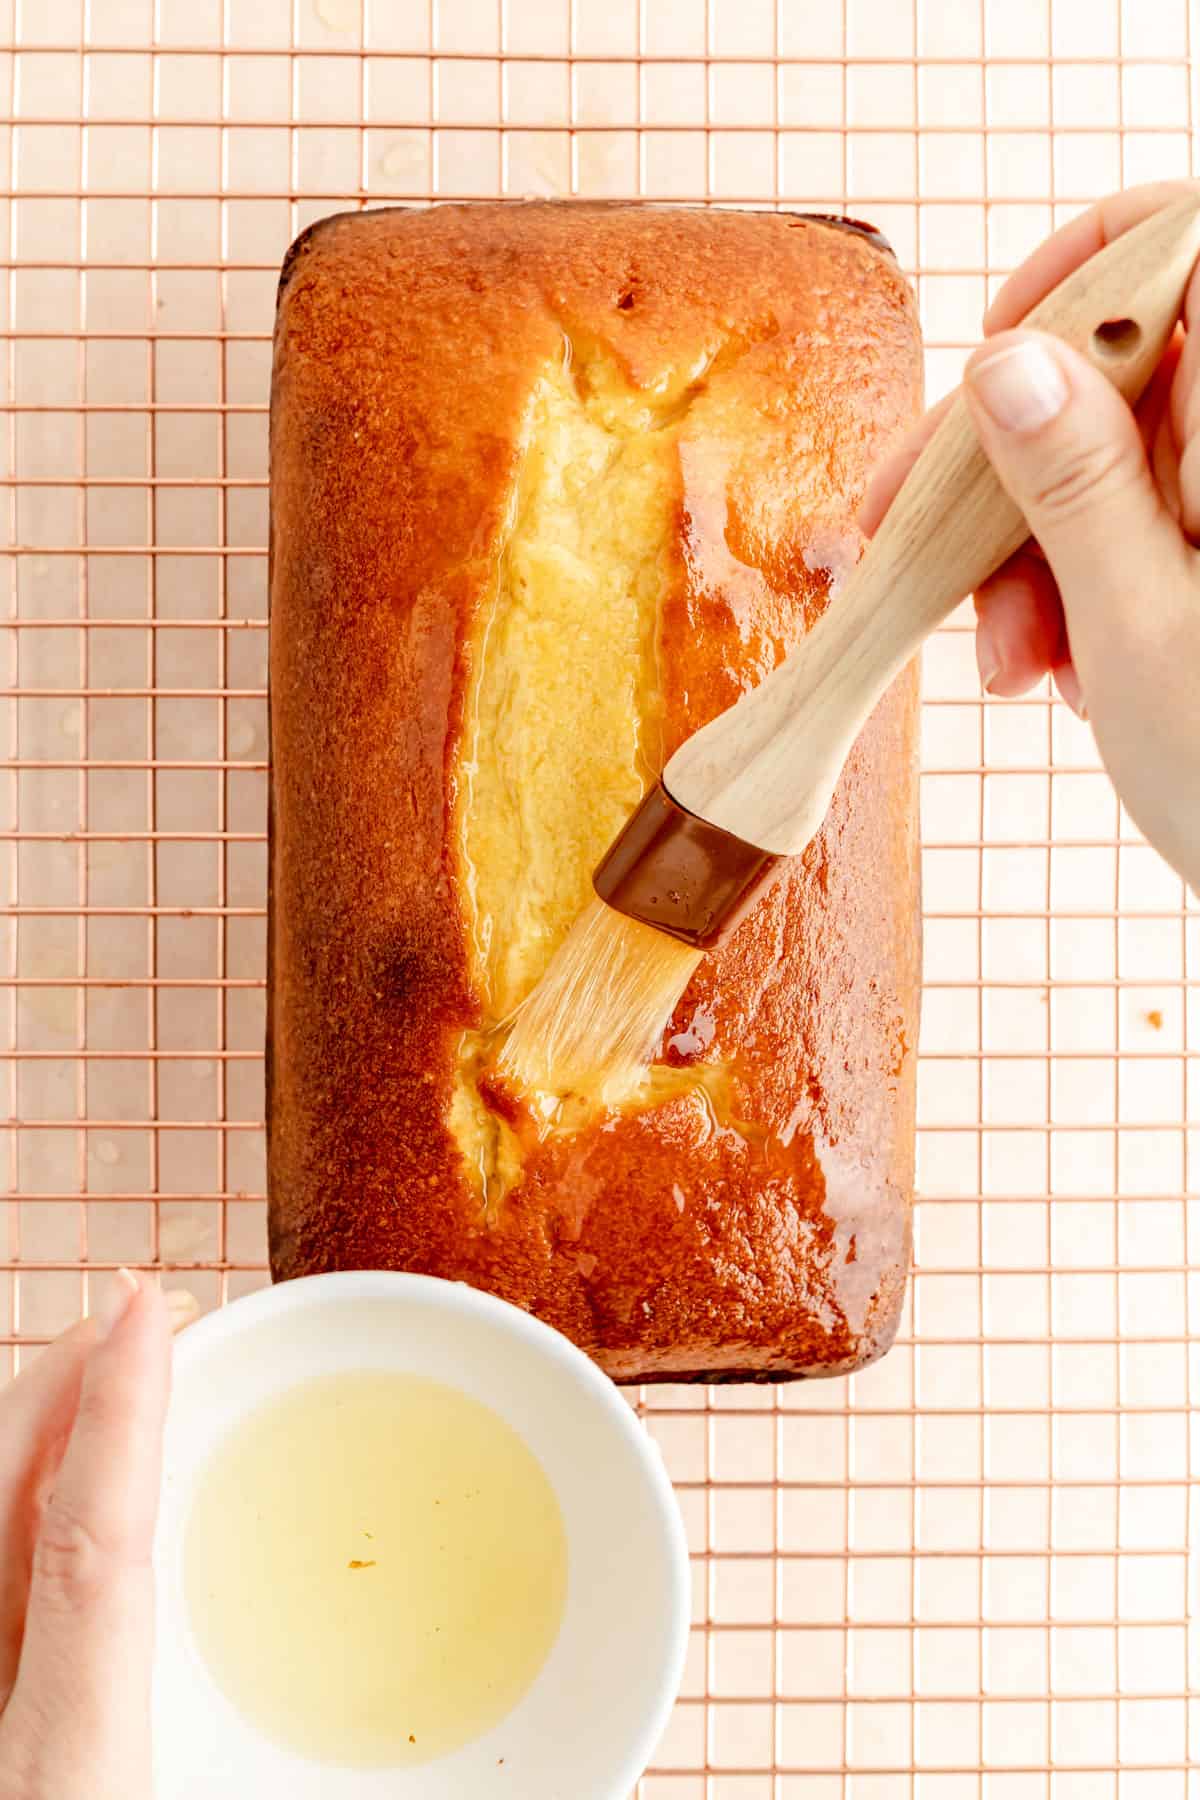 hand brushing a baked pound cake with lemon glaze from a bowl in the corner.